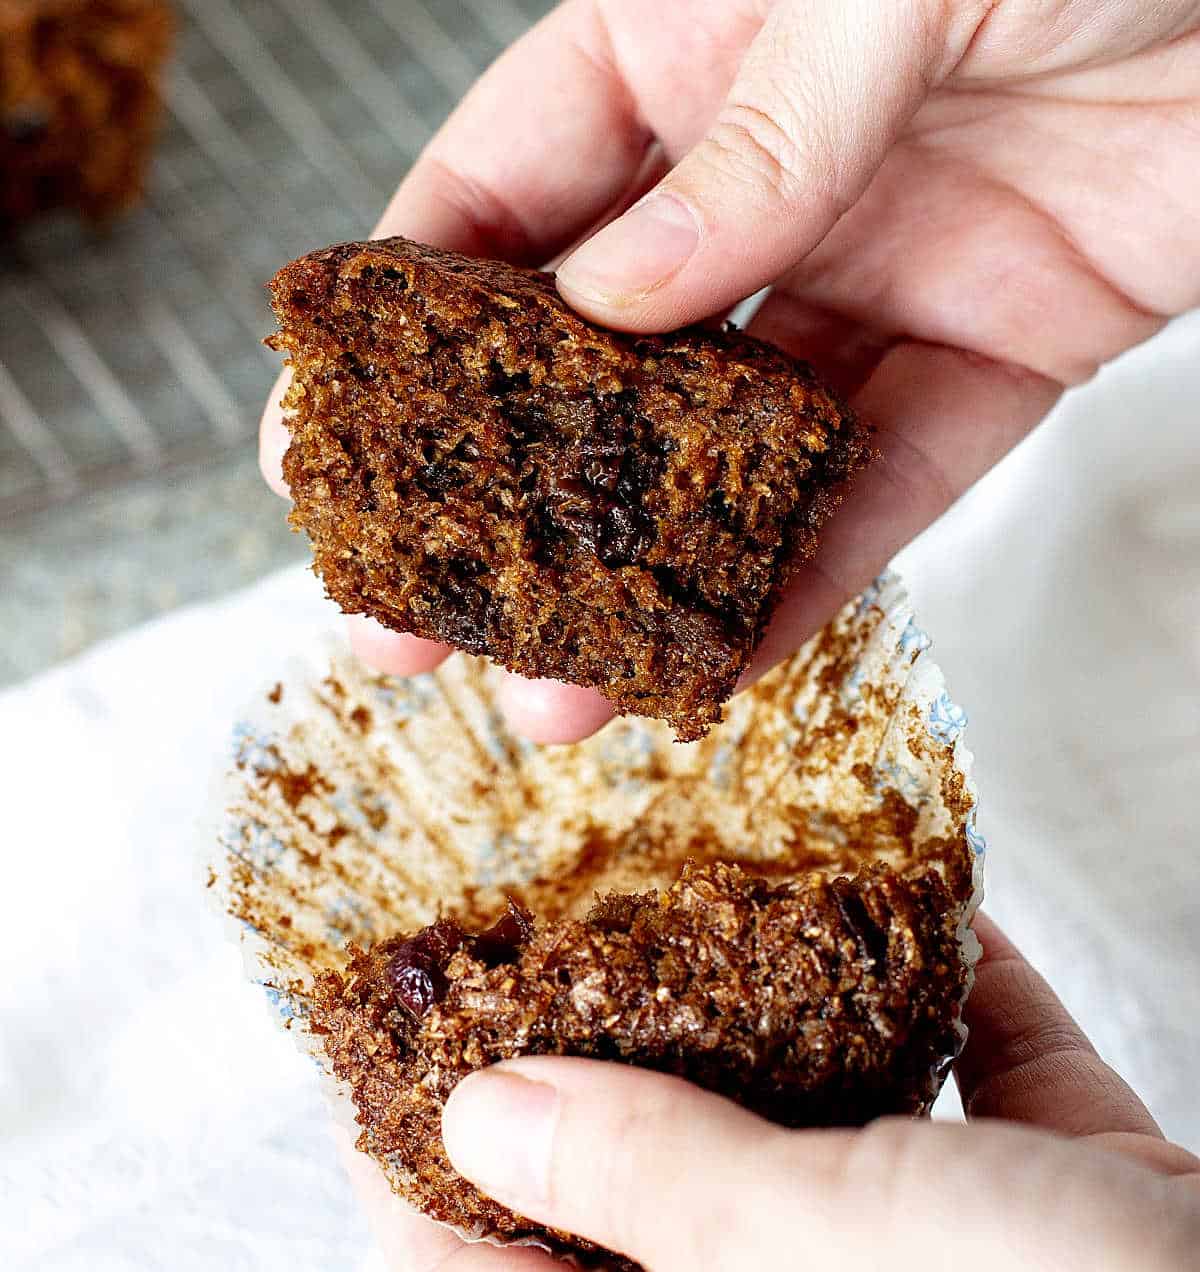 Hands holding a halved raisin bran muffin in a paper liner.